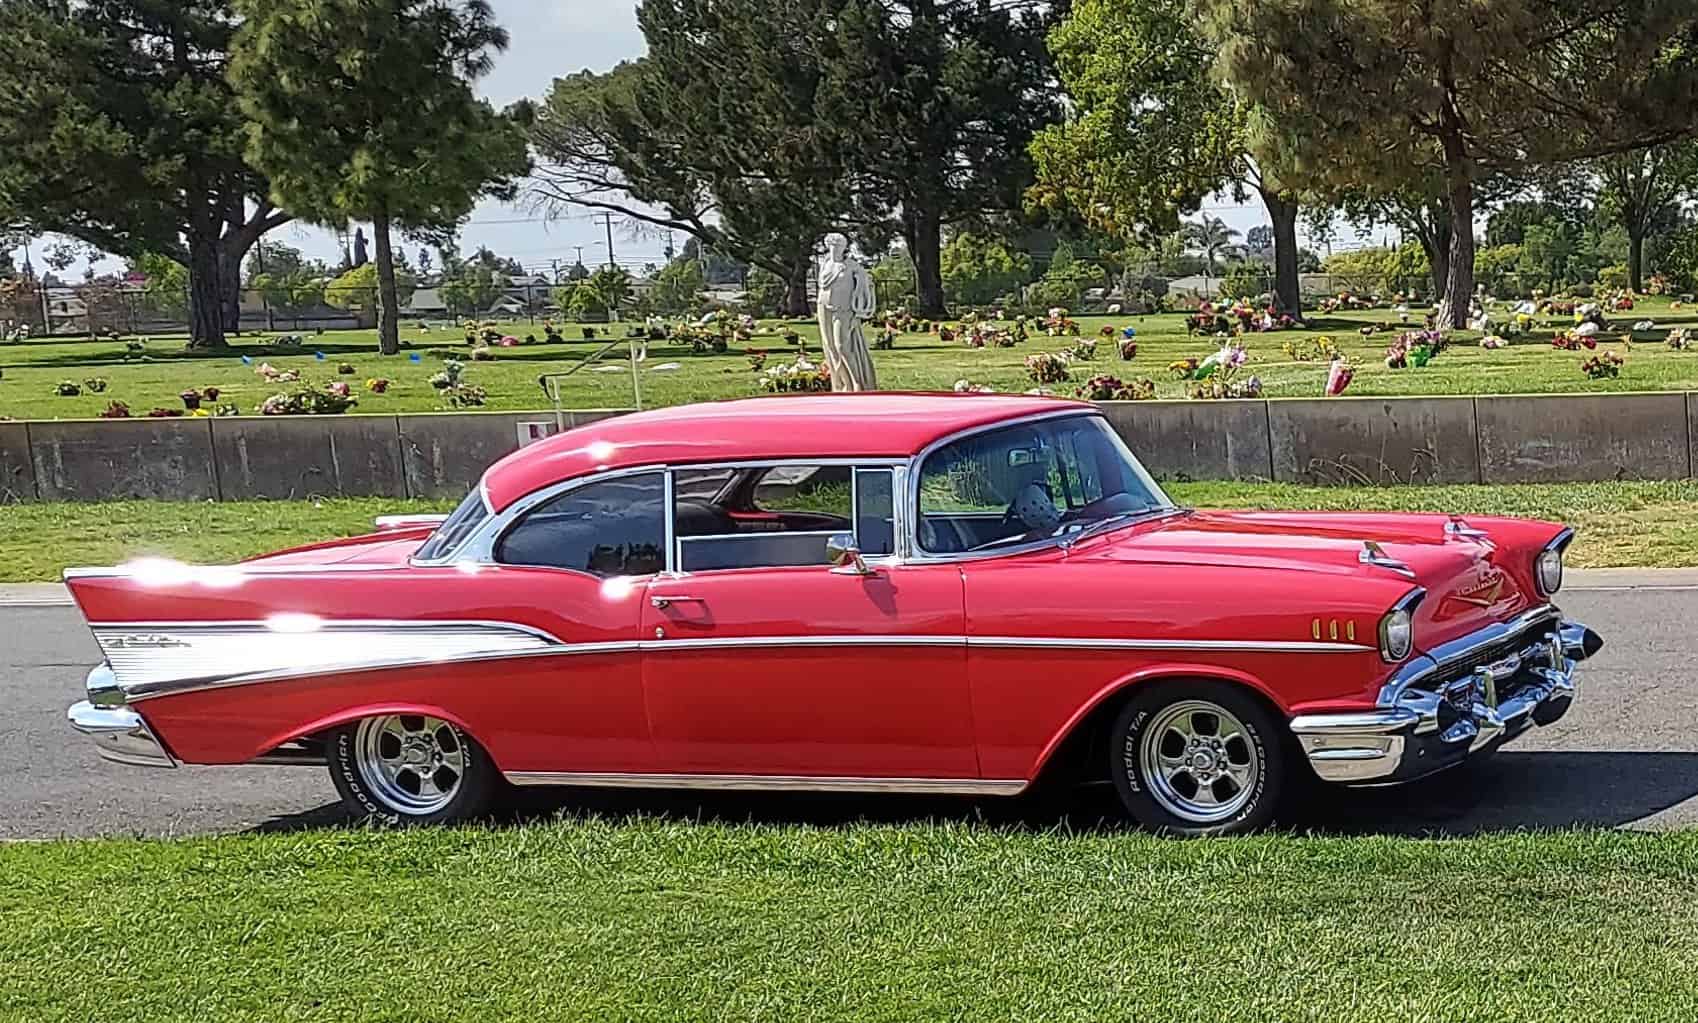 Chevy, My Classic Car Story: Restoring Peggy’s 1957 Chevy Bel Air, ClassicCars.com Journal